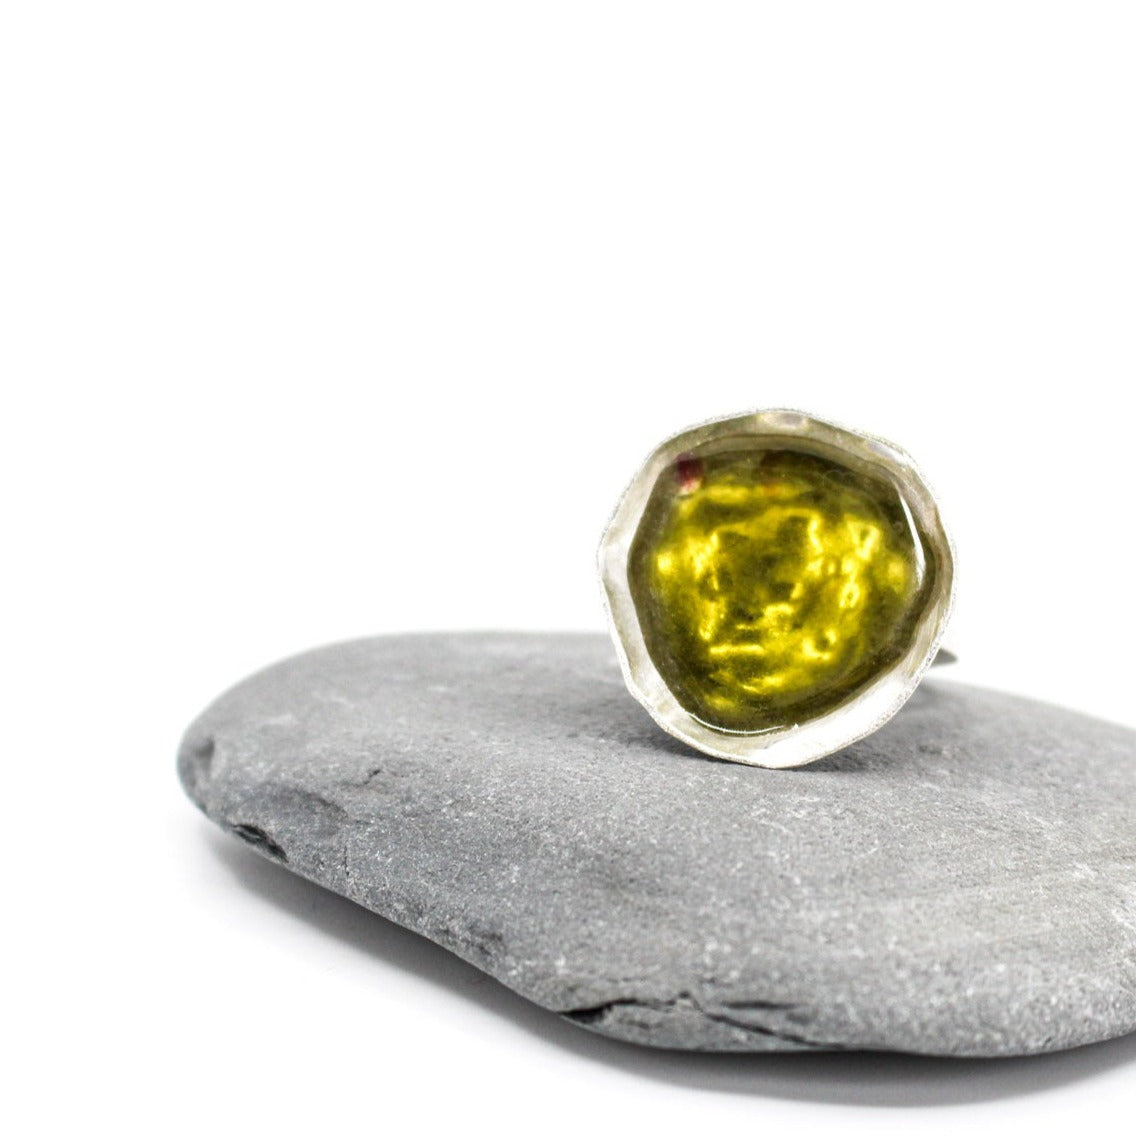 statement ring in 925 eco sterling silver filled with lime green resin, sabine werner jewellery 